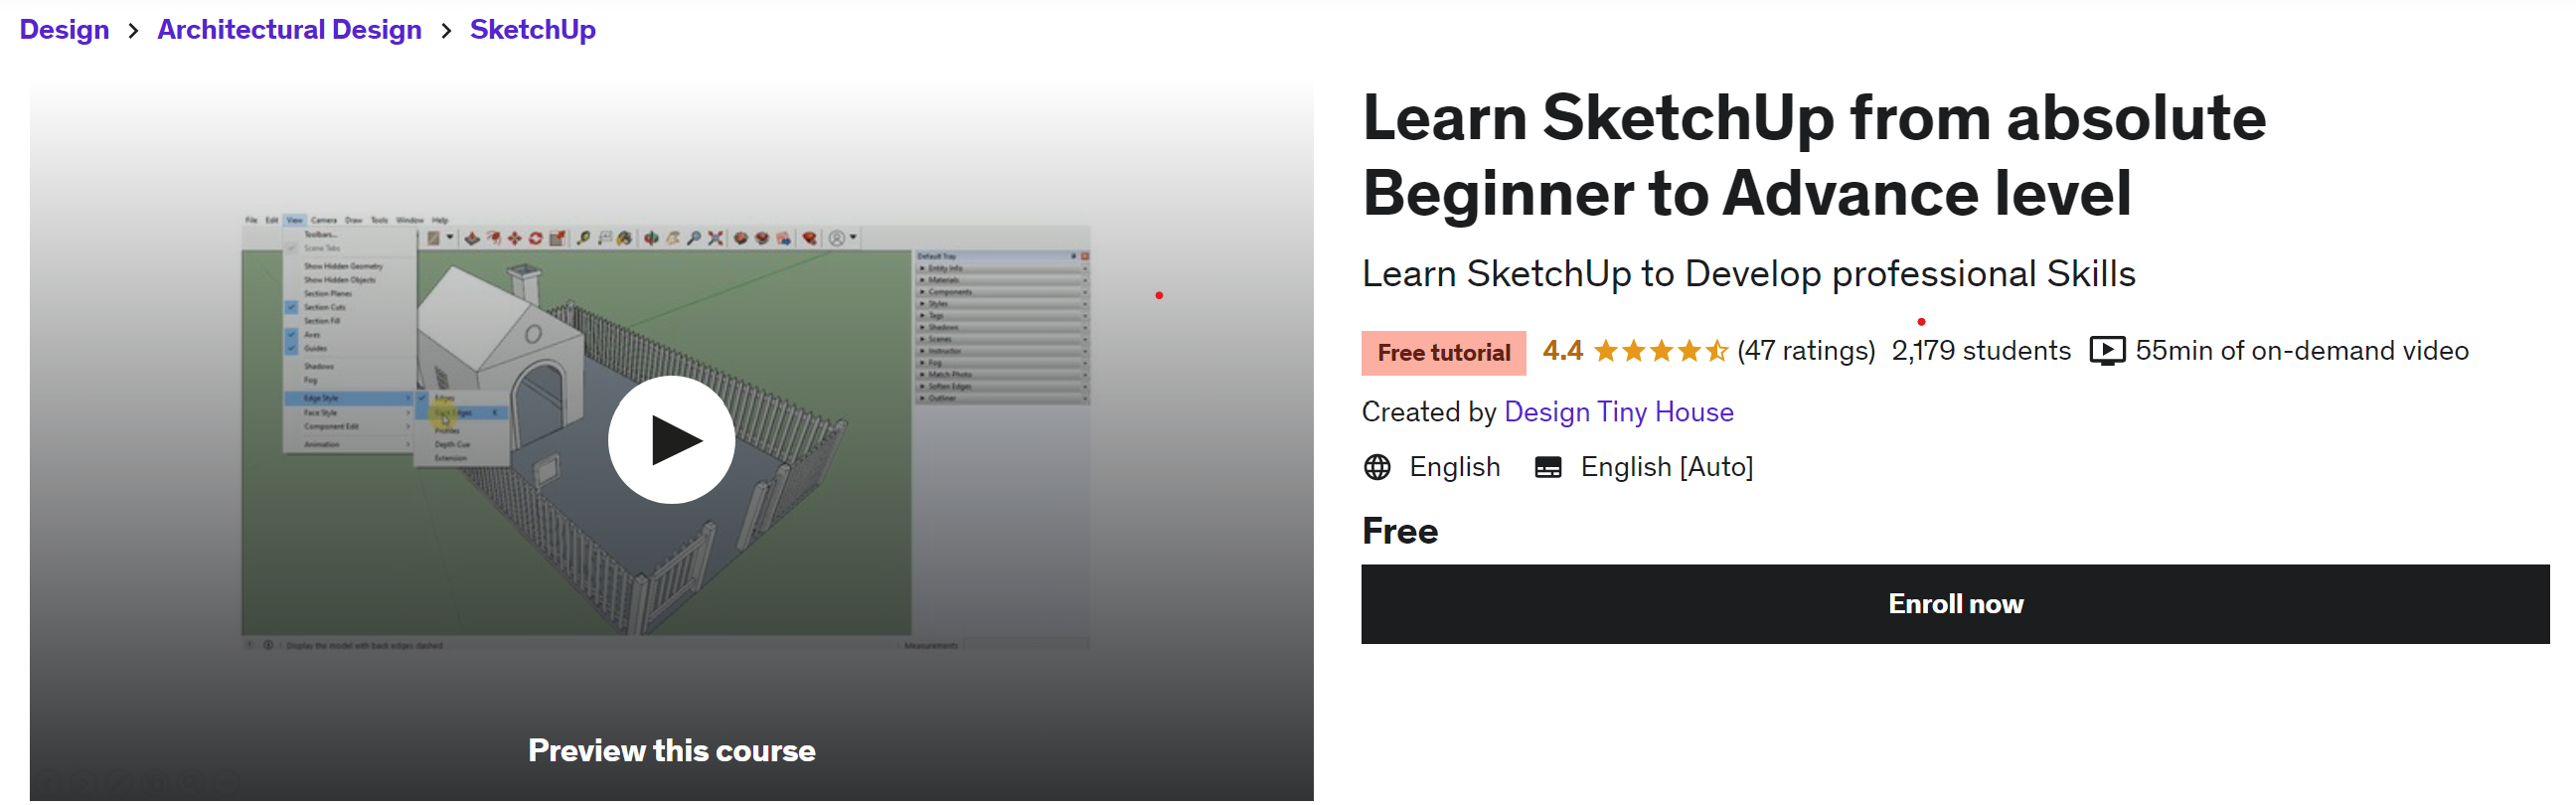 Master 3D Modeling: 9 Top Free Online SketchUp Courses - The Fordham Ram